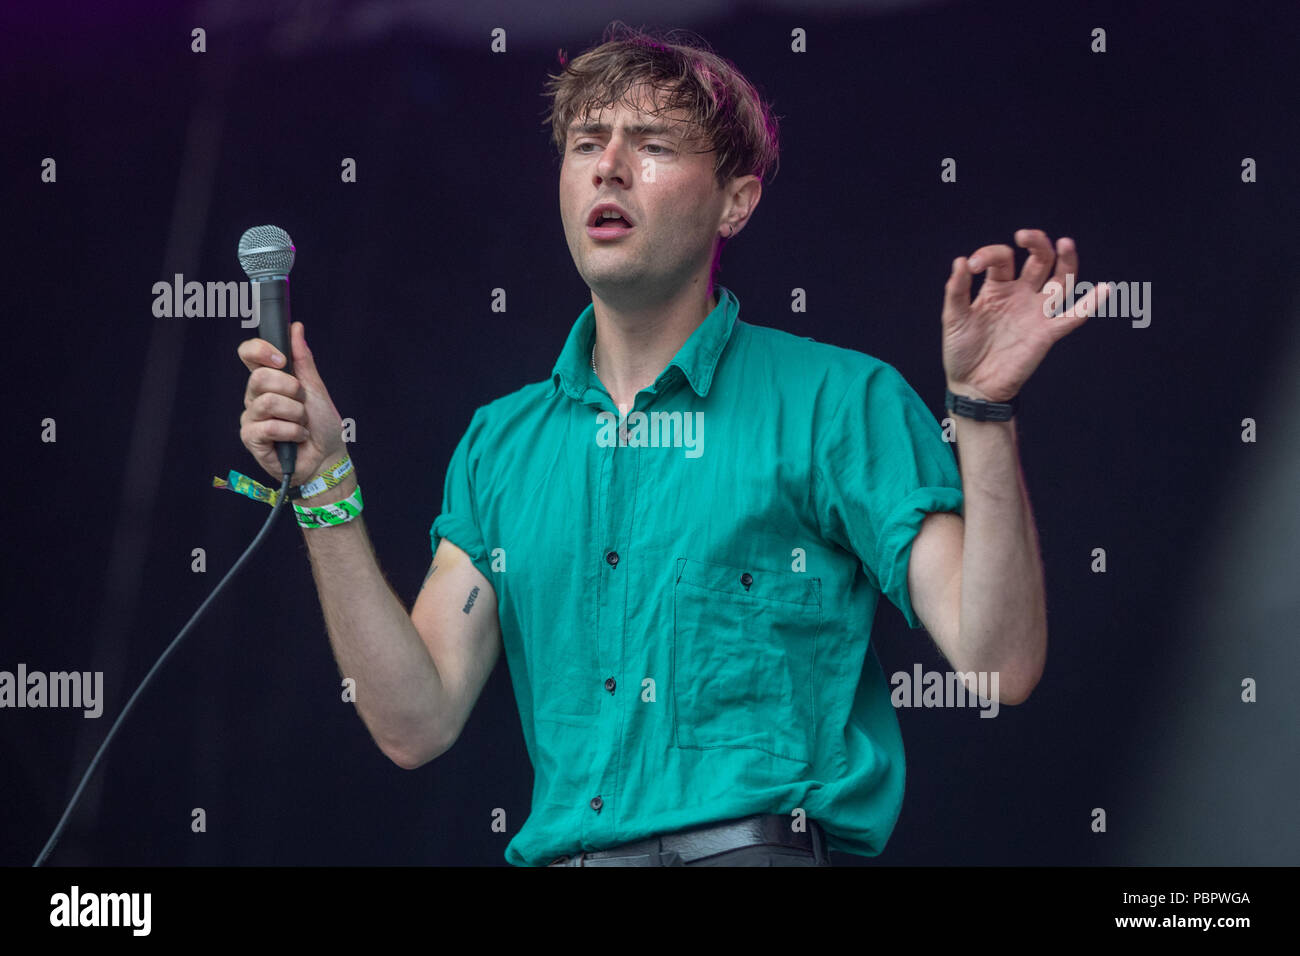 Photo Gallery: Kendal Calling // July 2023 — When The Horn Blows